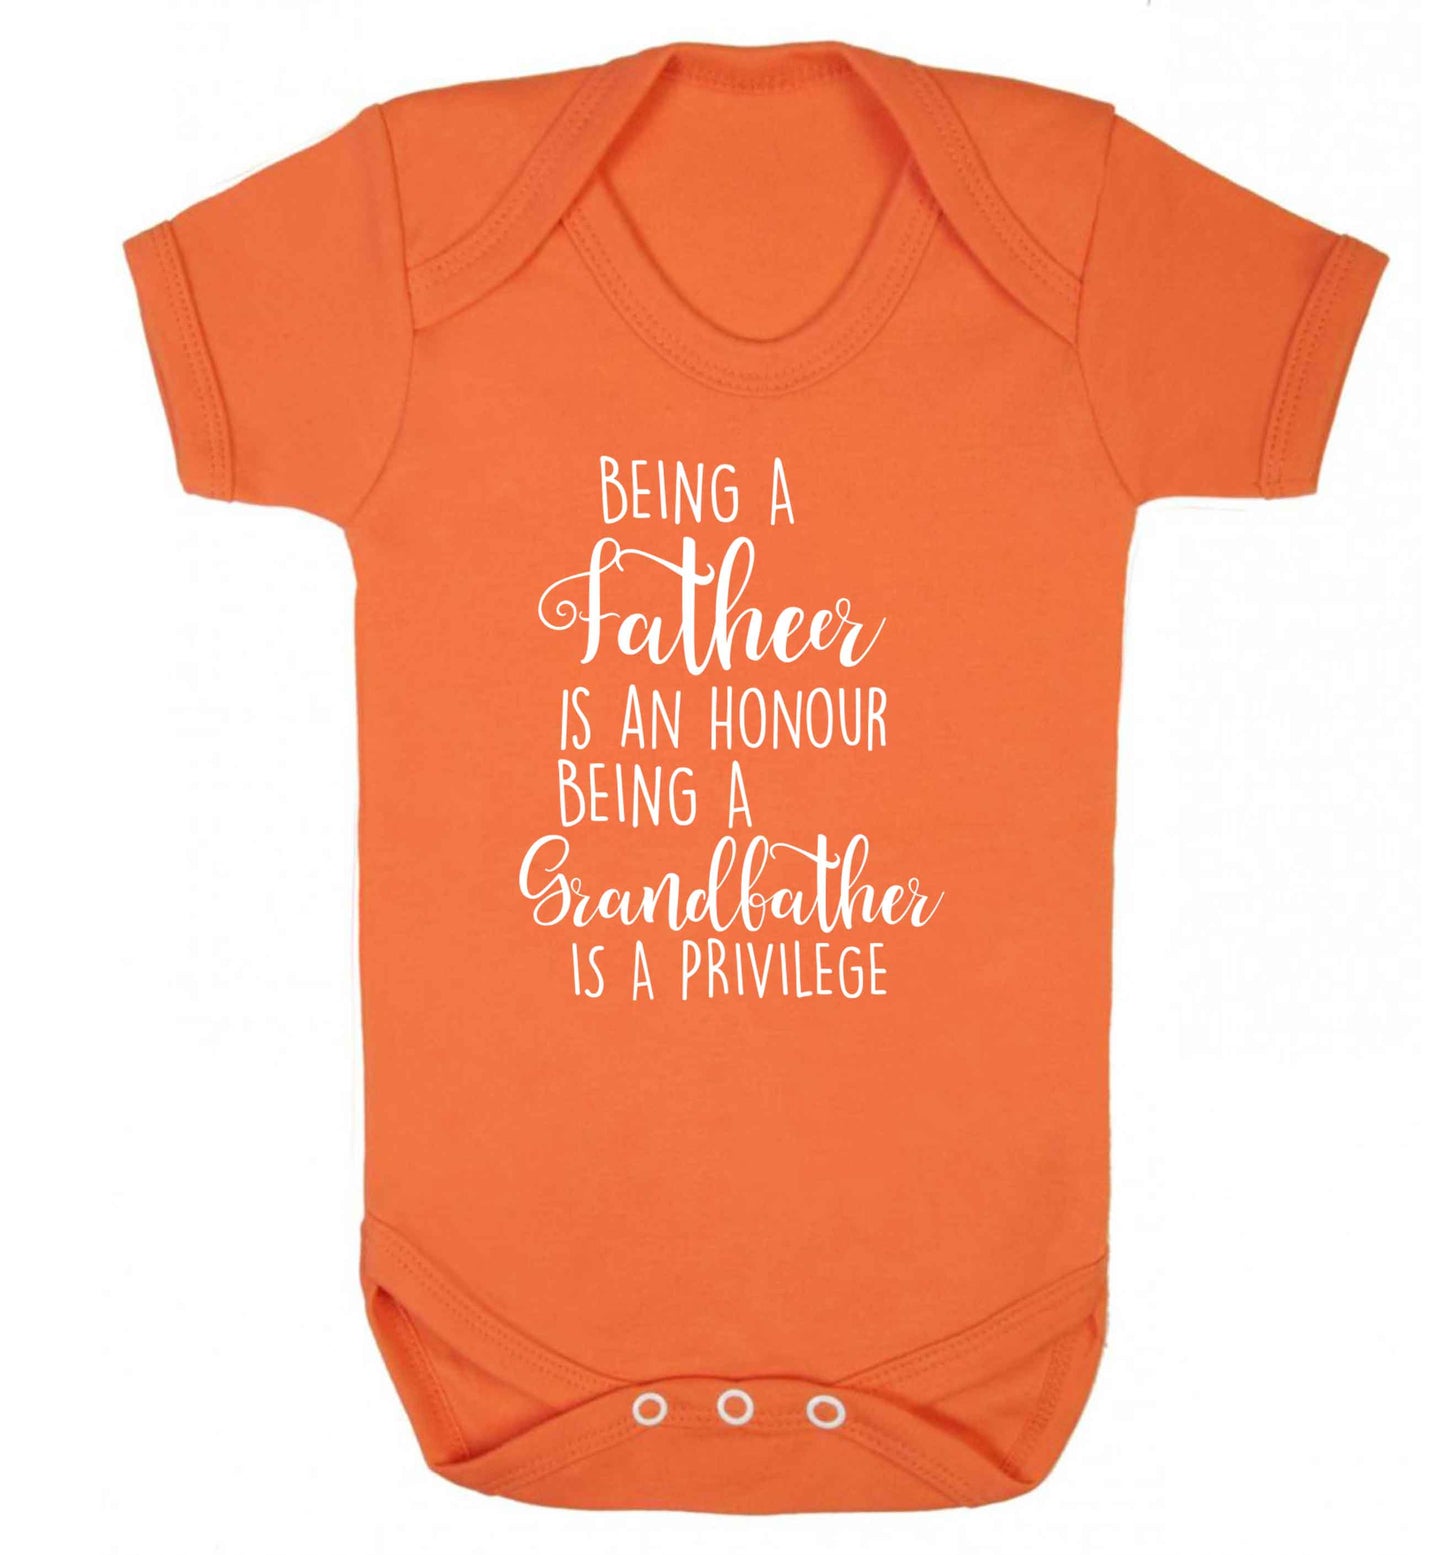 Being a father is an honour being a grandfather is a privilege Baby Vest orange 18-24 months